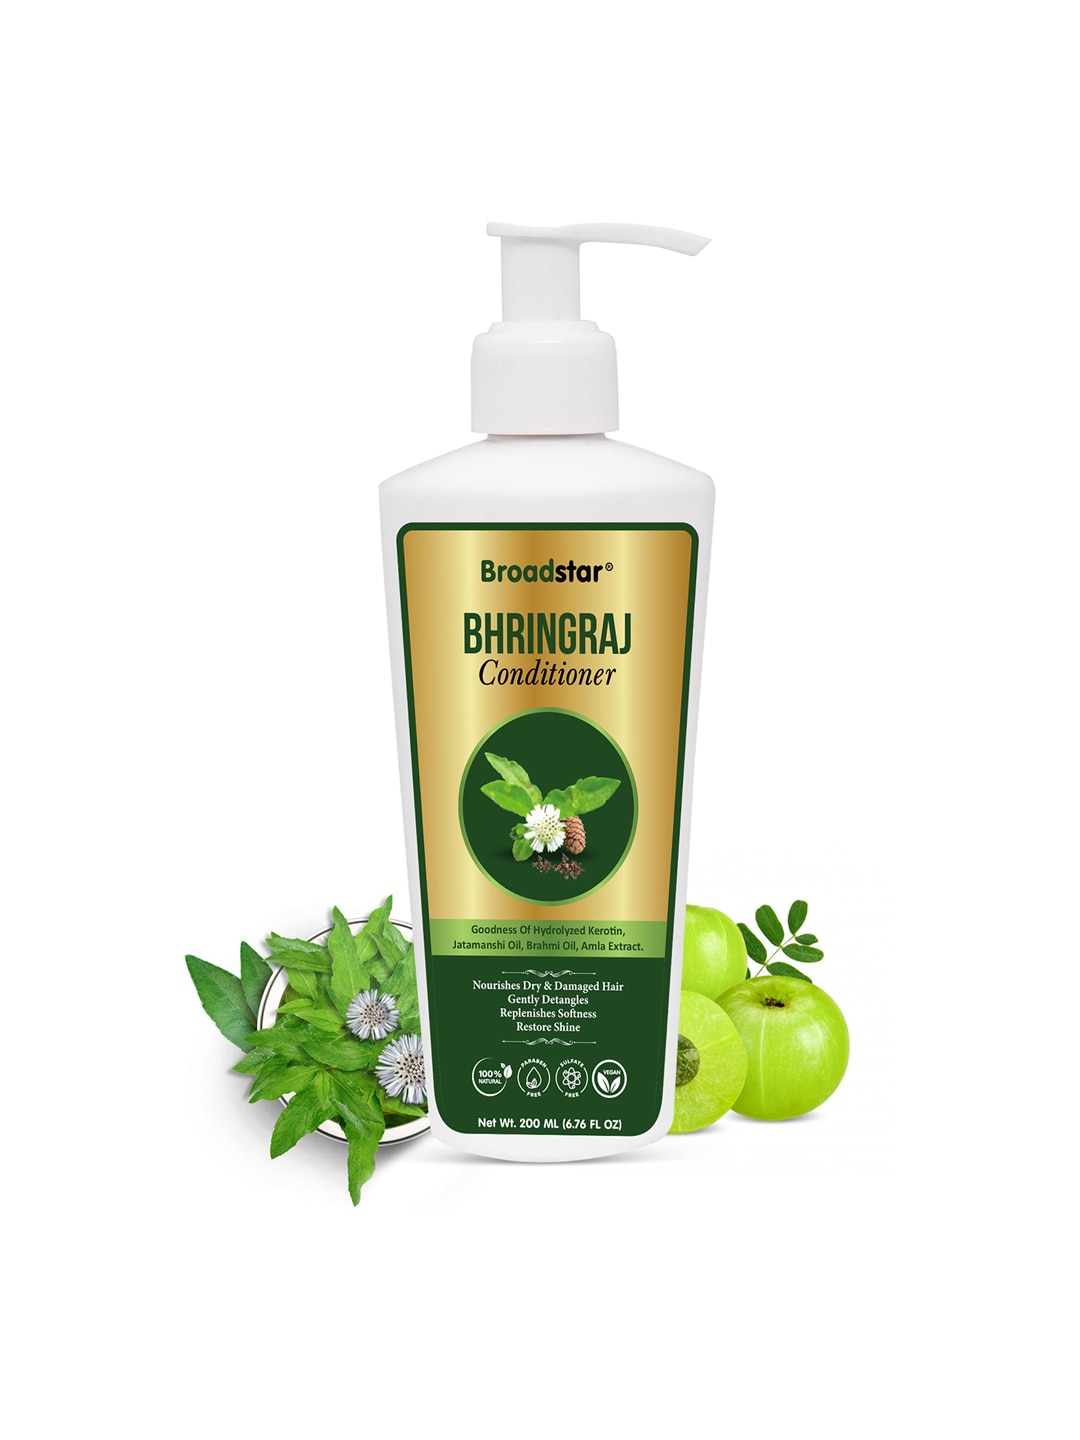 BROADSTAR Bhringraj Conditioner For Hair Growth - 200ml Price in India